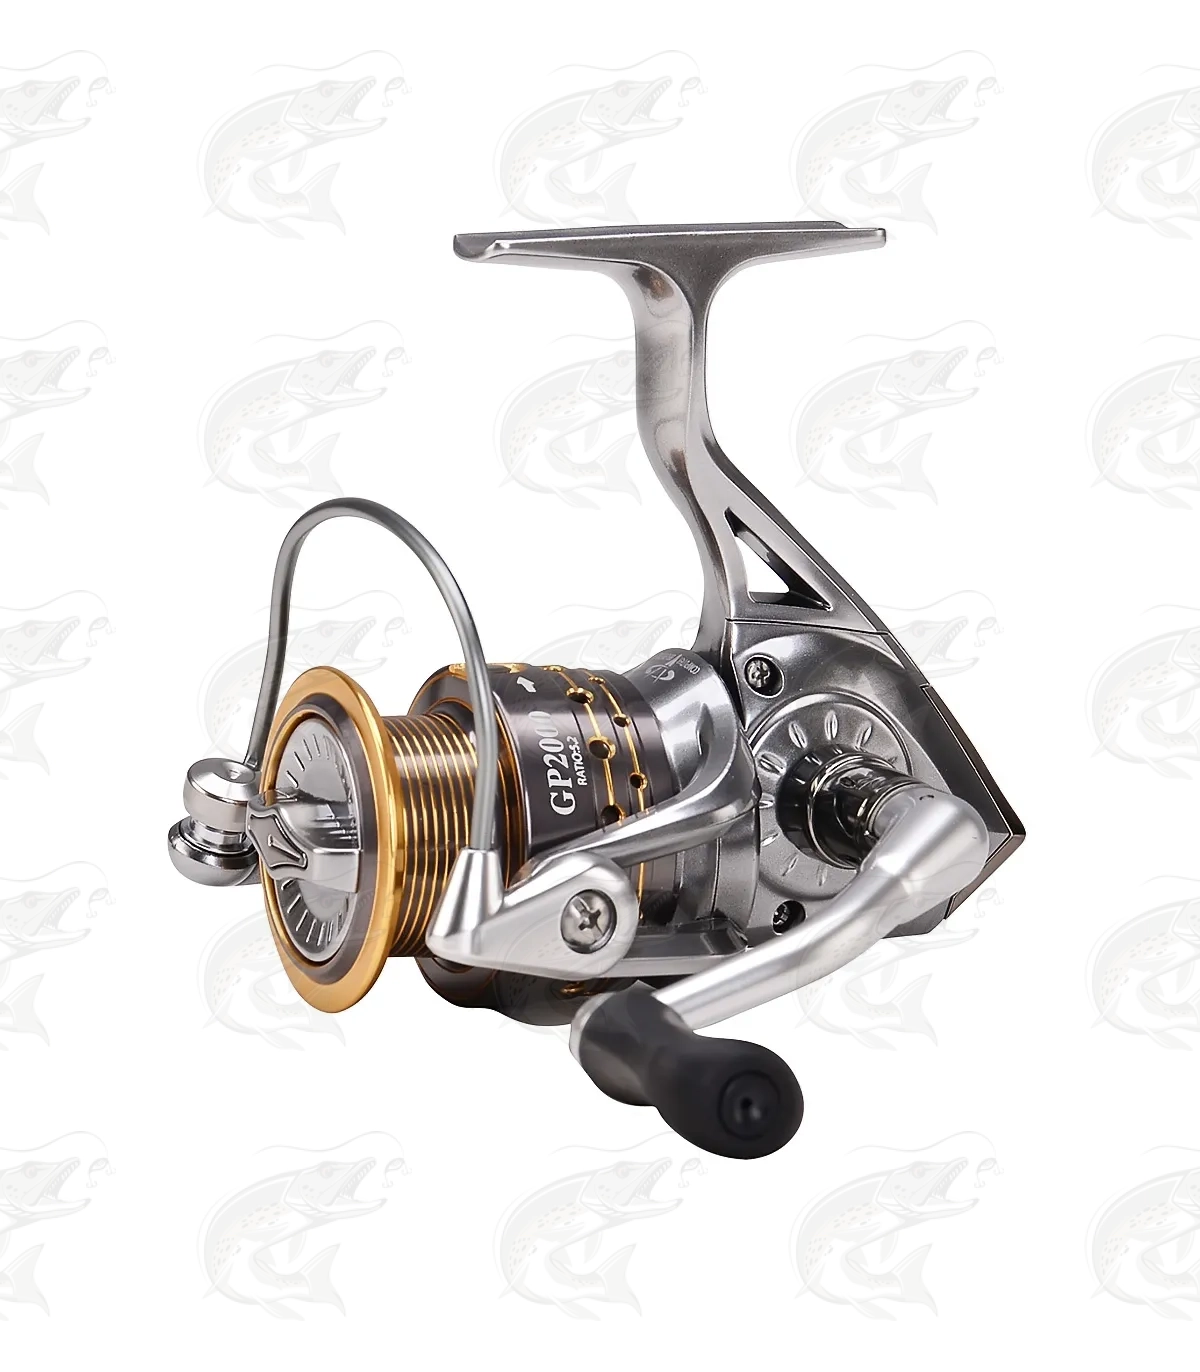 TiCA Galant Spin-X GP spinning reel